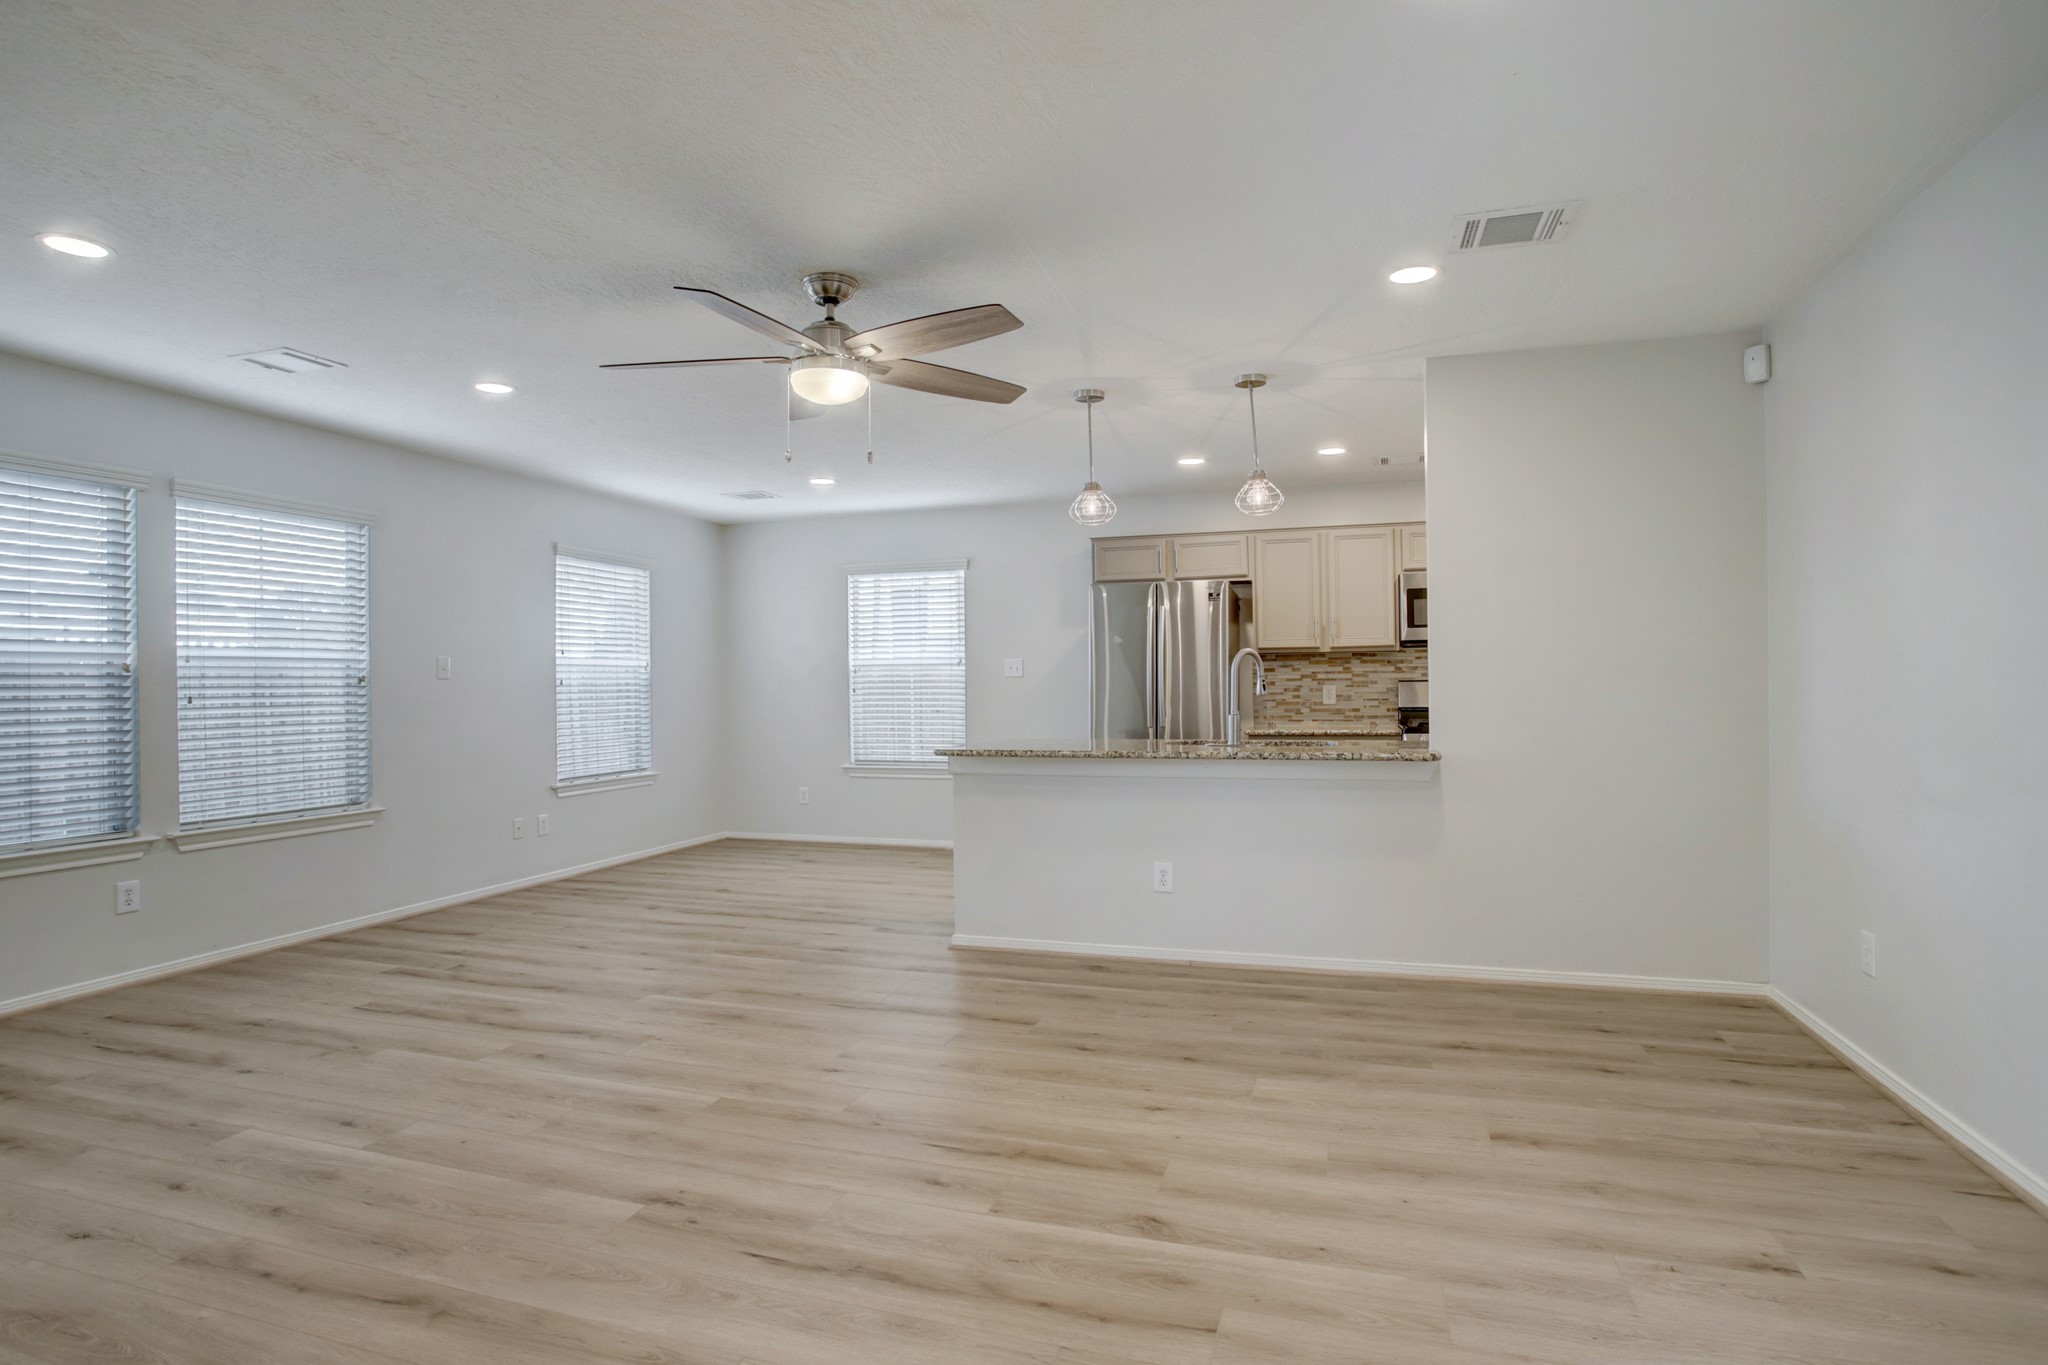 Spacious living area, open floor plan with new flooring and contemporary lighting.